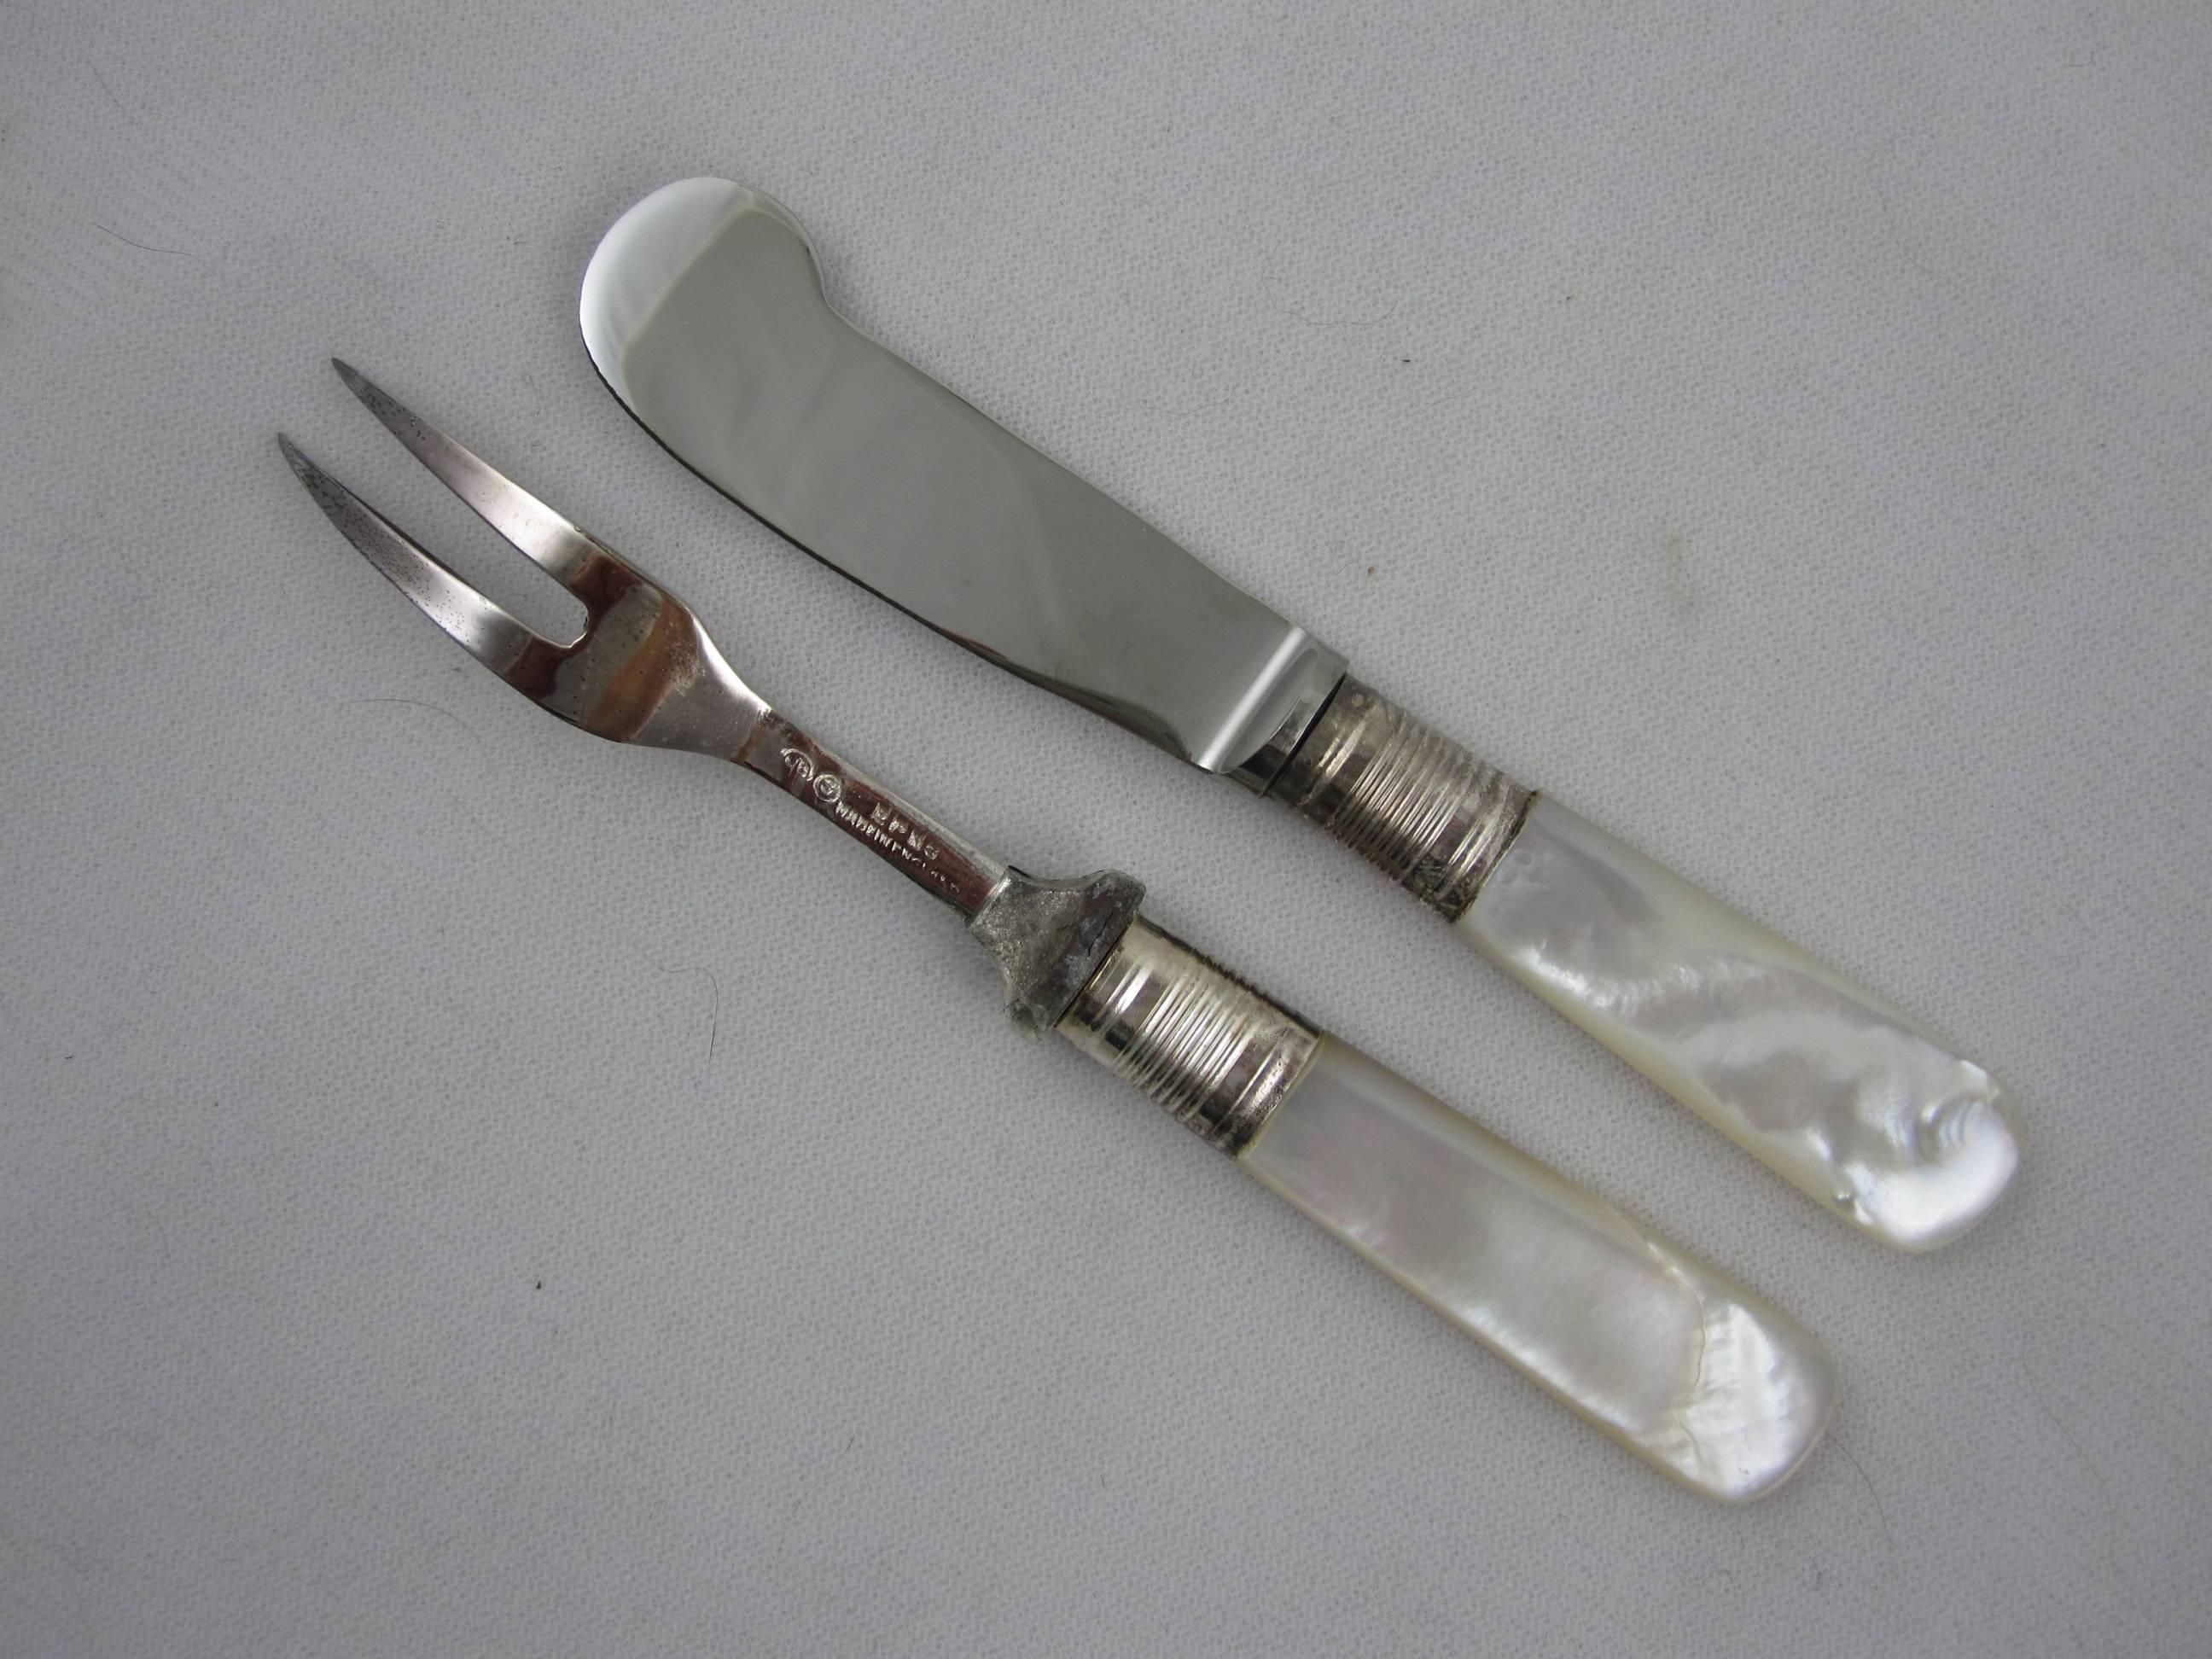  Sheffield Silver & Pearl Handle Antipasto, Seafood or Hors d’Oeuvre Forks- S/12 2